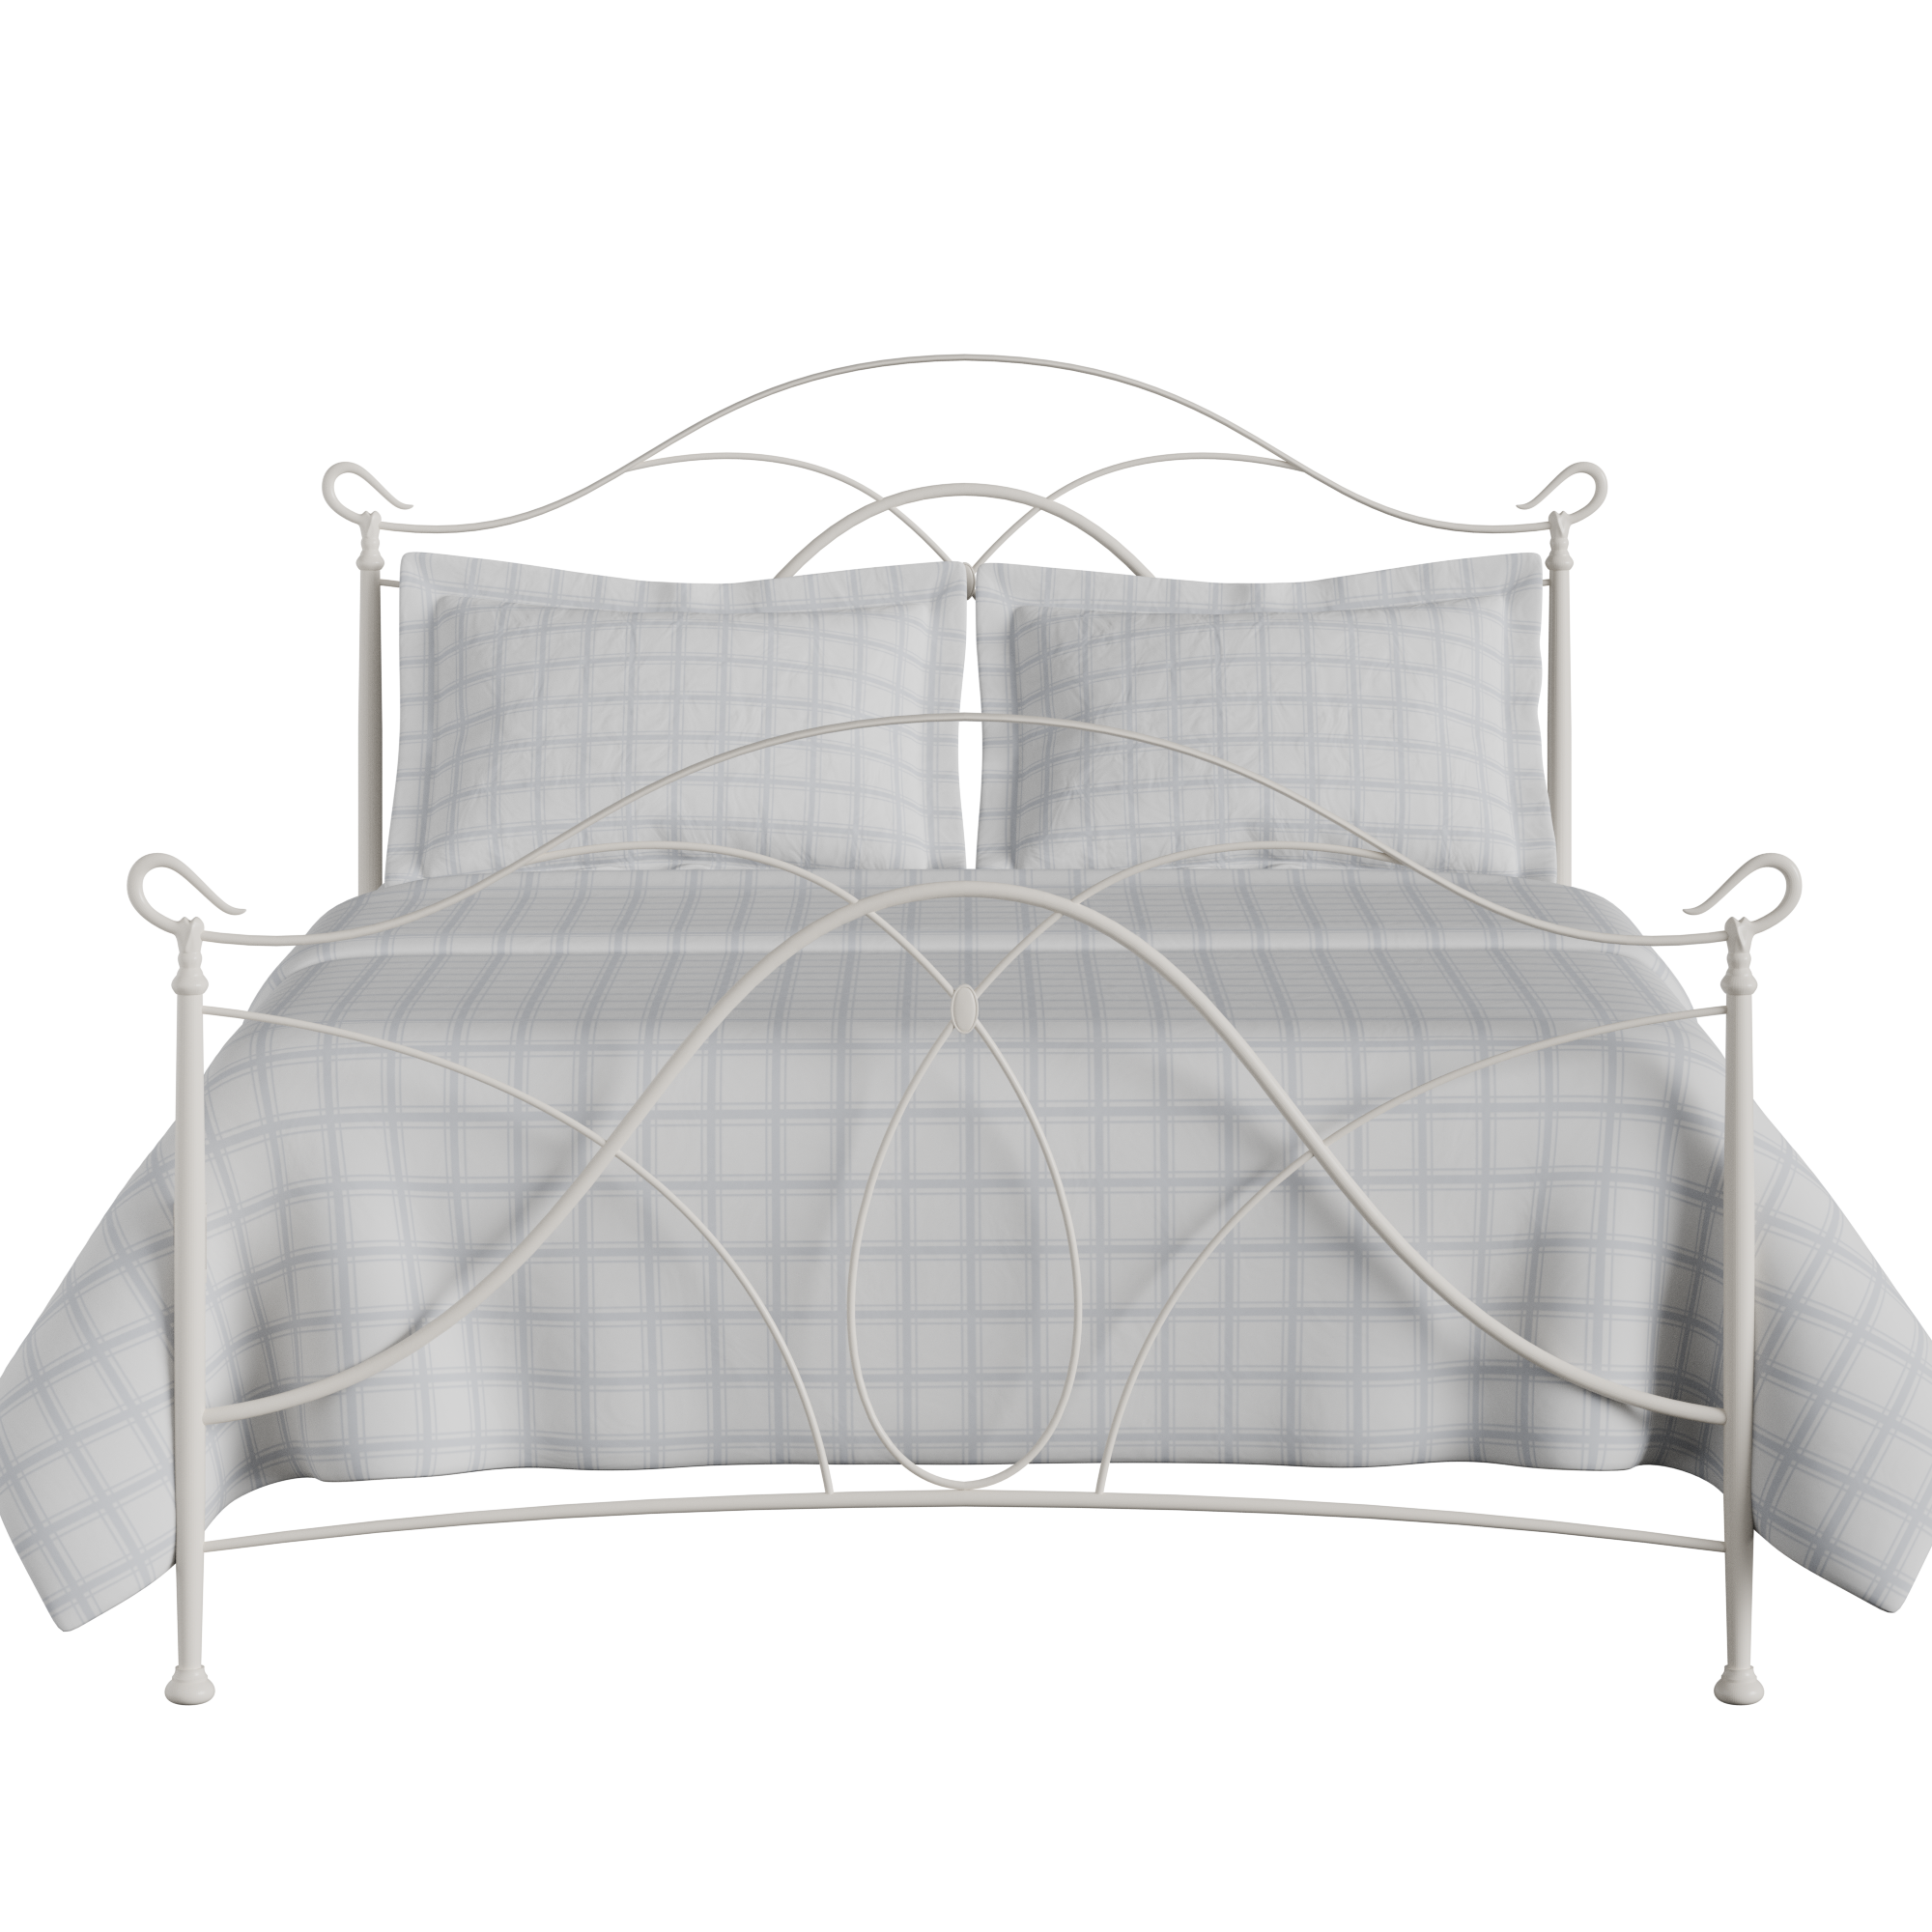 Ardo iron/metal bed in ivory